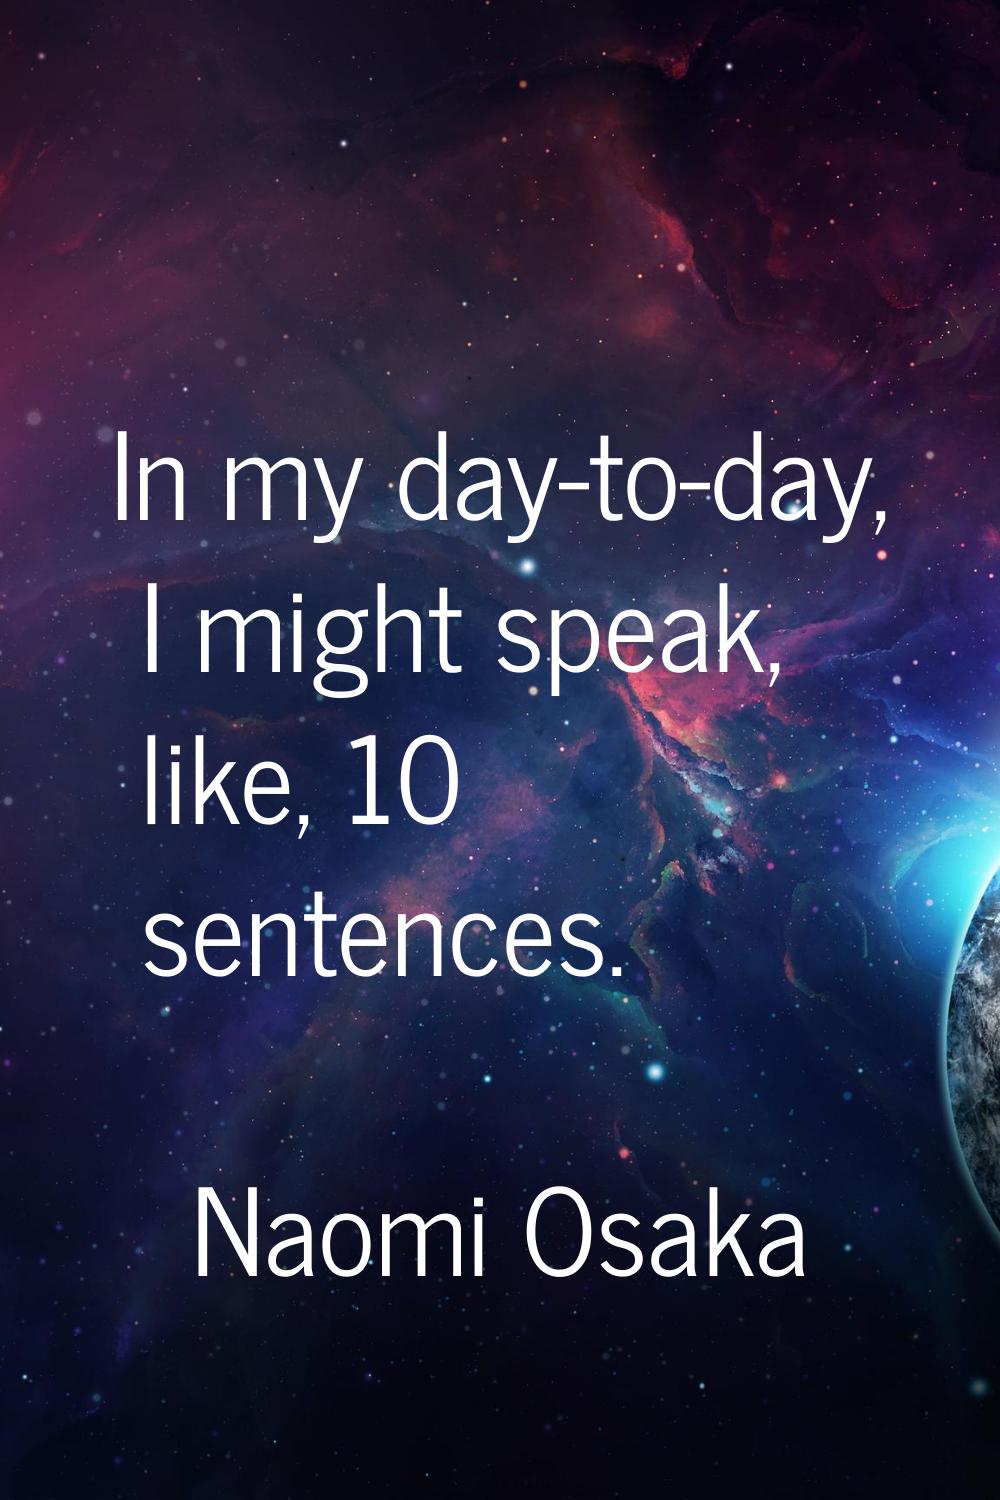 In my day-to-day, I might speak, like, 10 sentences.